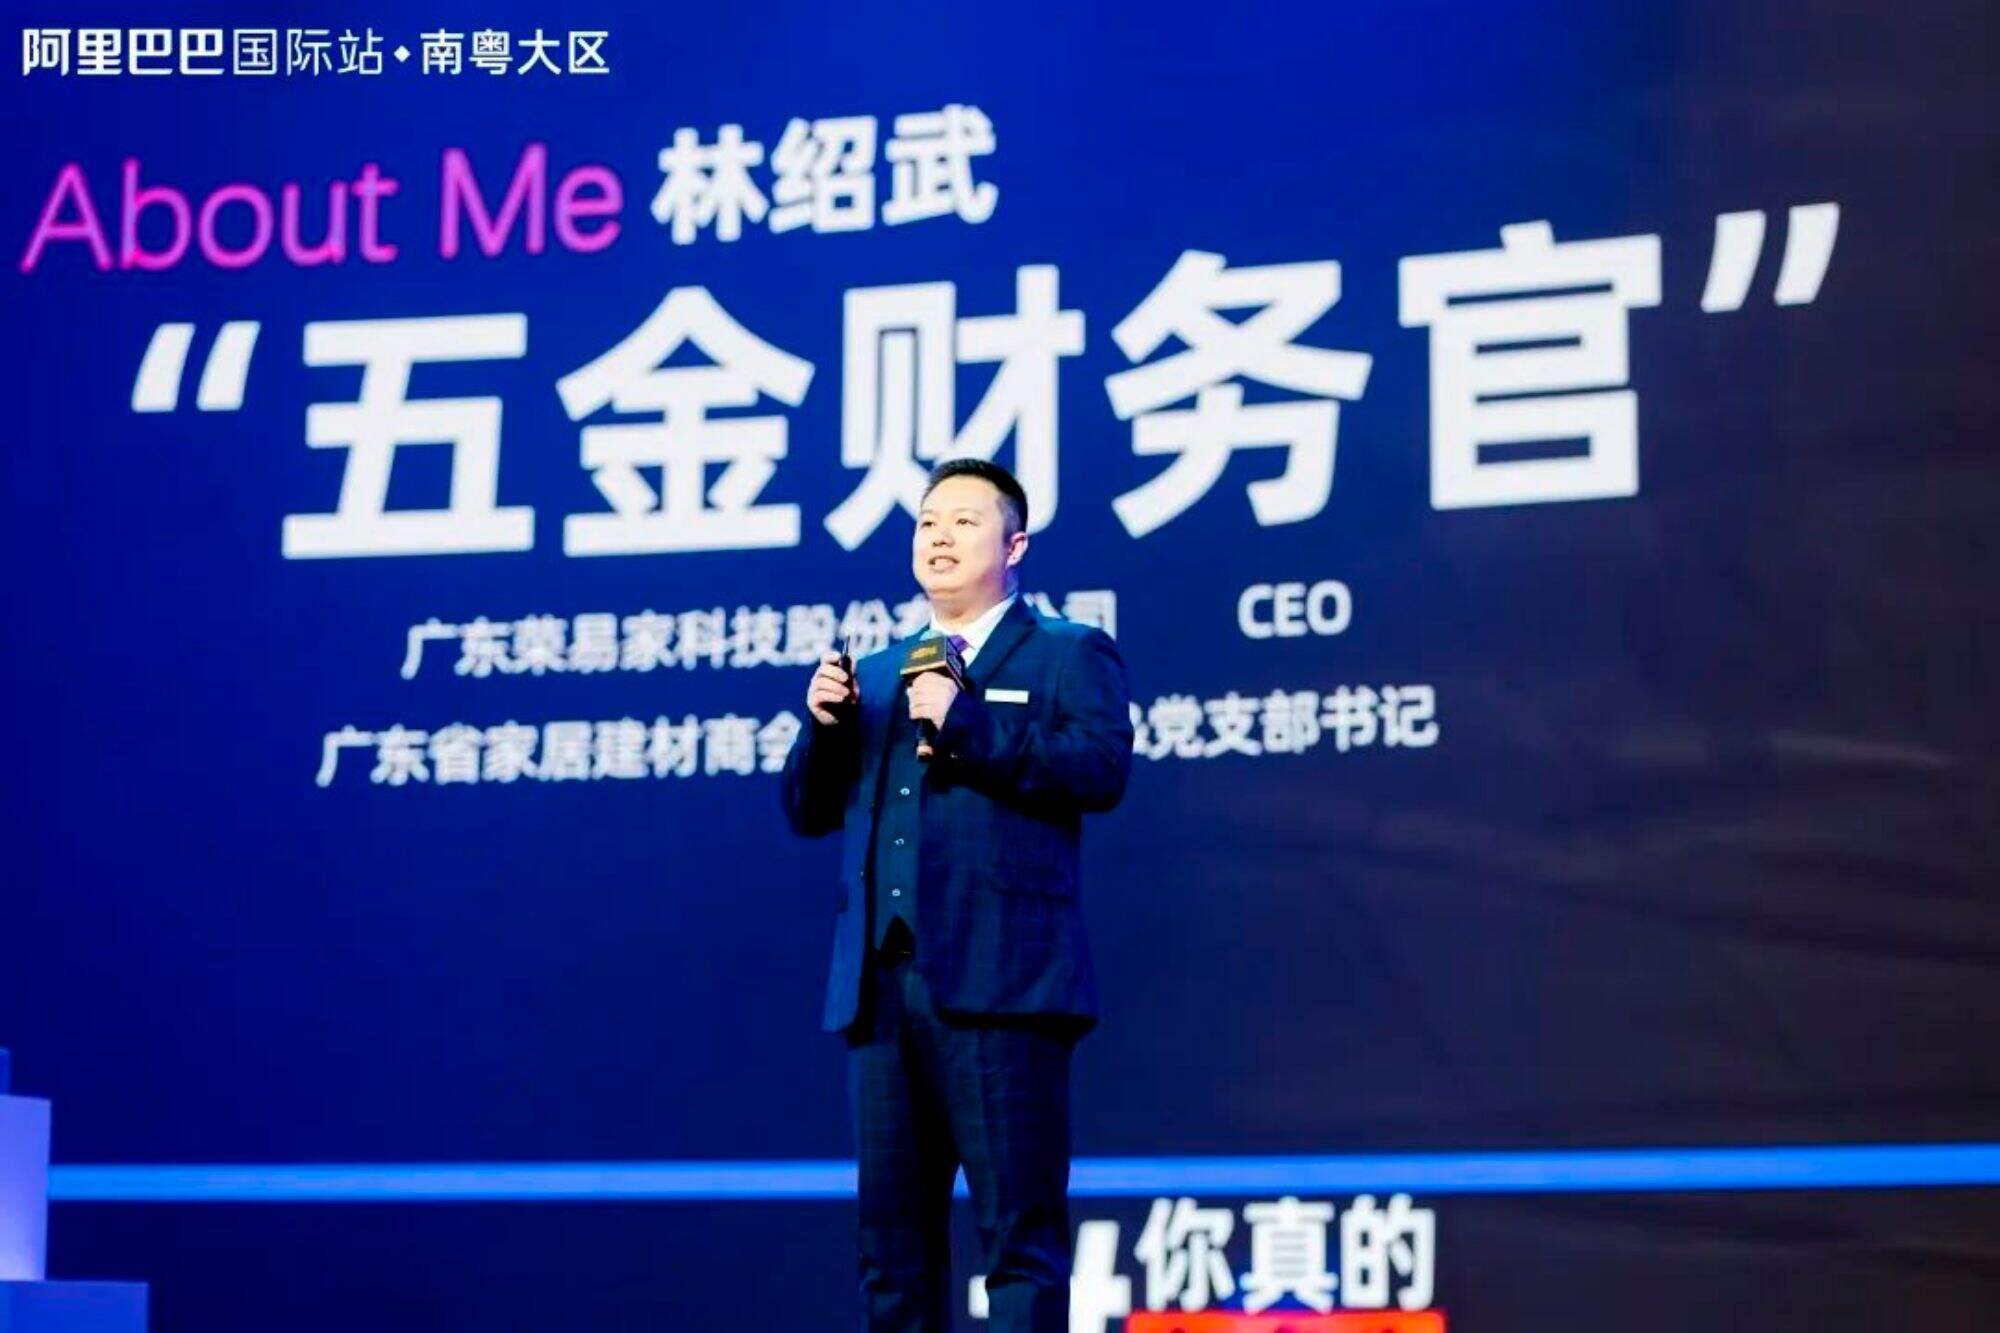 ALIBABA NEW POWER AWARD「Path to the future」FINALS -The Experience Sharing from the CEO of ROEASY Company AWEN LIN Who Is Called “All-rounder on Oversea Business”